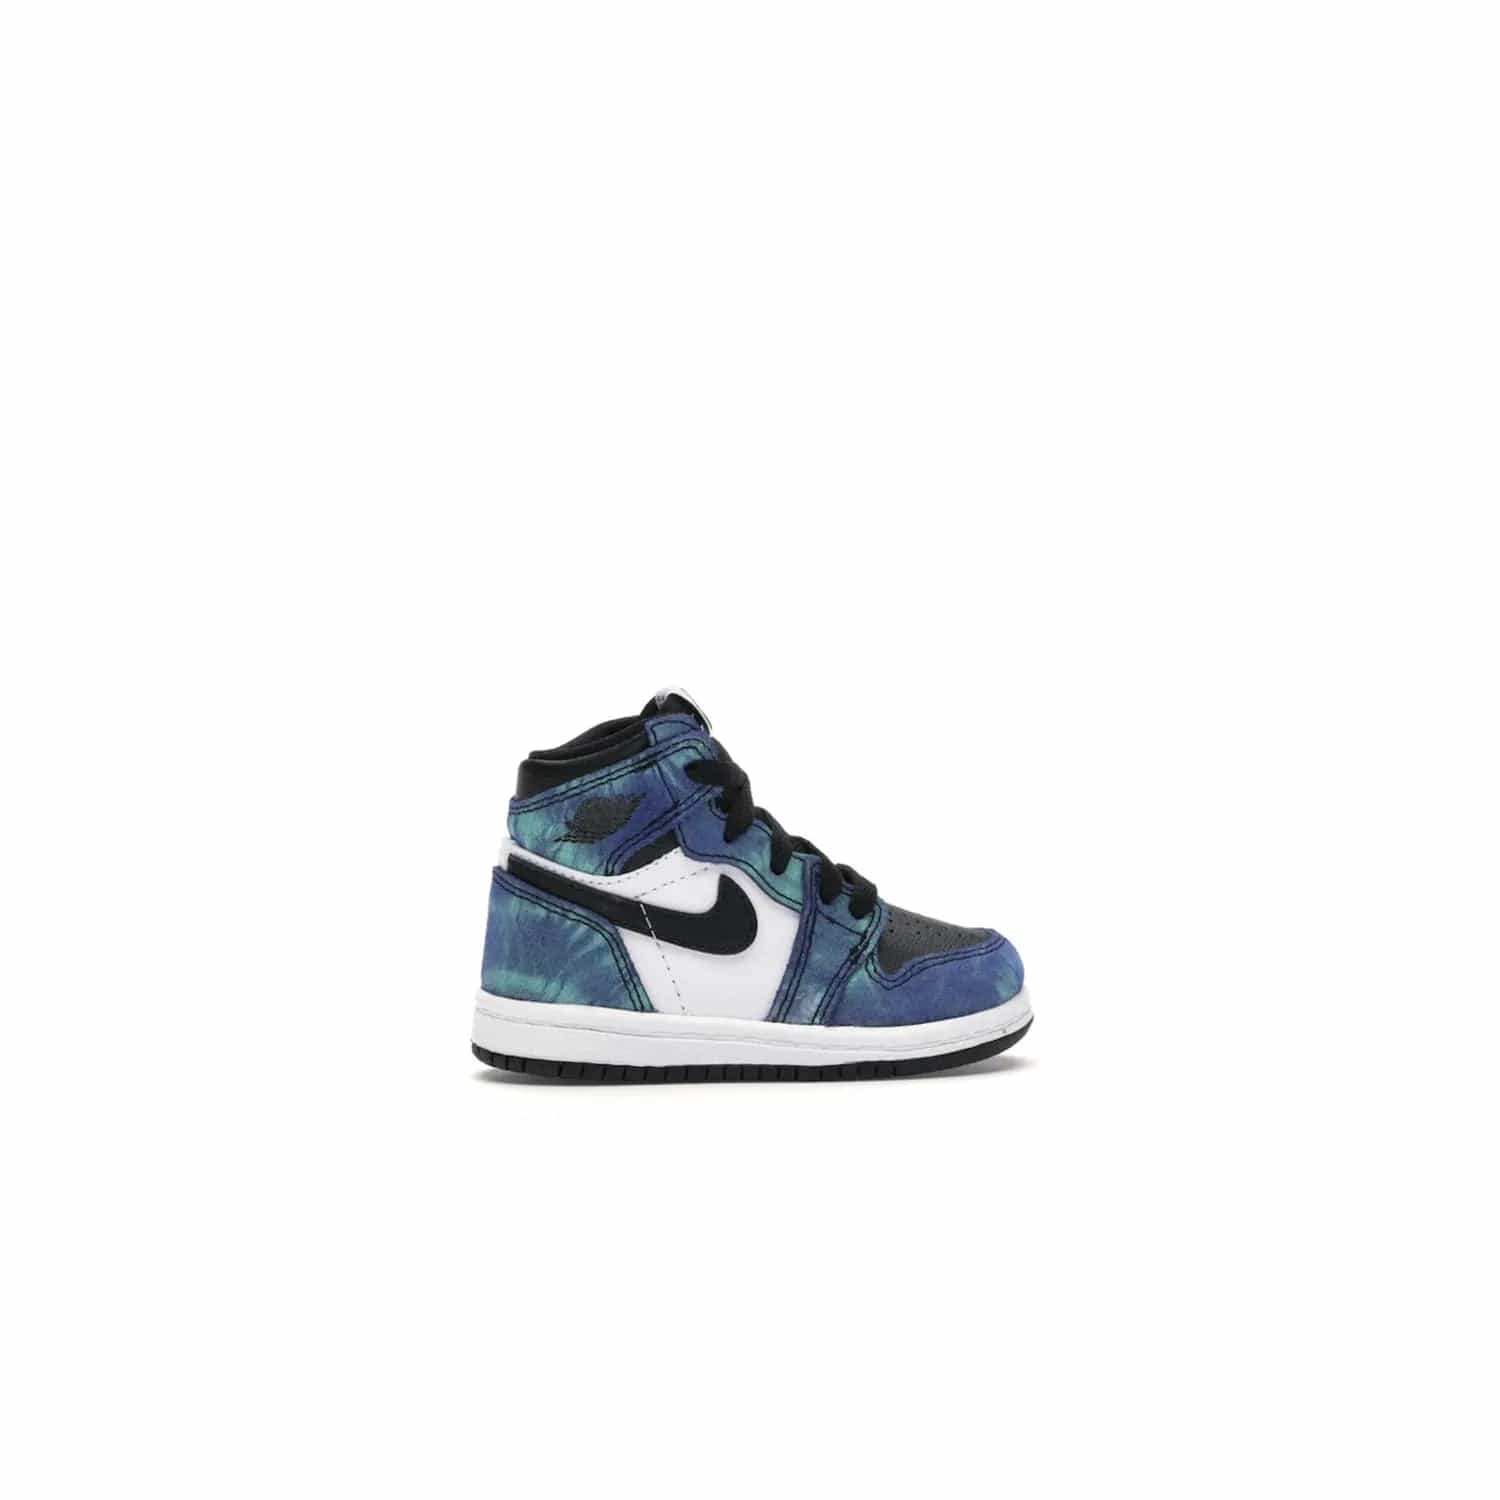 Jordan 1 Retro High Tie Dye (TD) - Image 36 - Only at www.BallersClubKickz.com - Add a unique twist to your sneaker collection with the Jordan 1 Retro High Tie Dye (TD). Classic Air Jordan 1 details like toe box perforations and the signature Swoosh logo on the sidewall are topped with an eye-catching tie dye design that’s perfect for styling all year round.